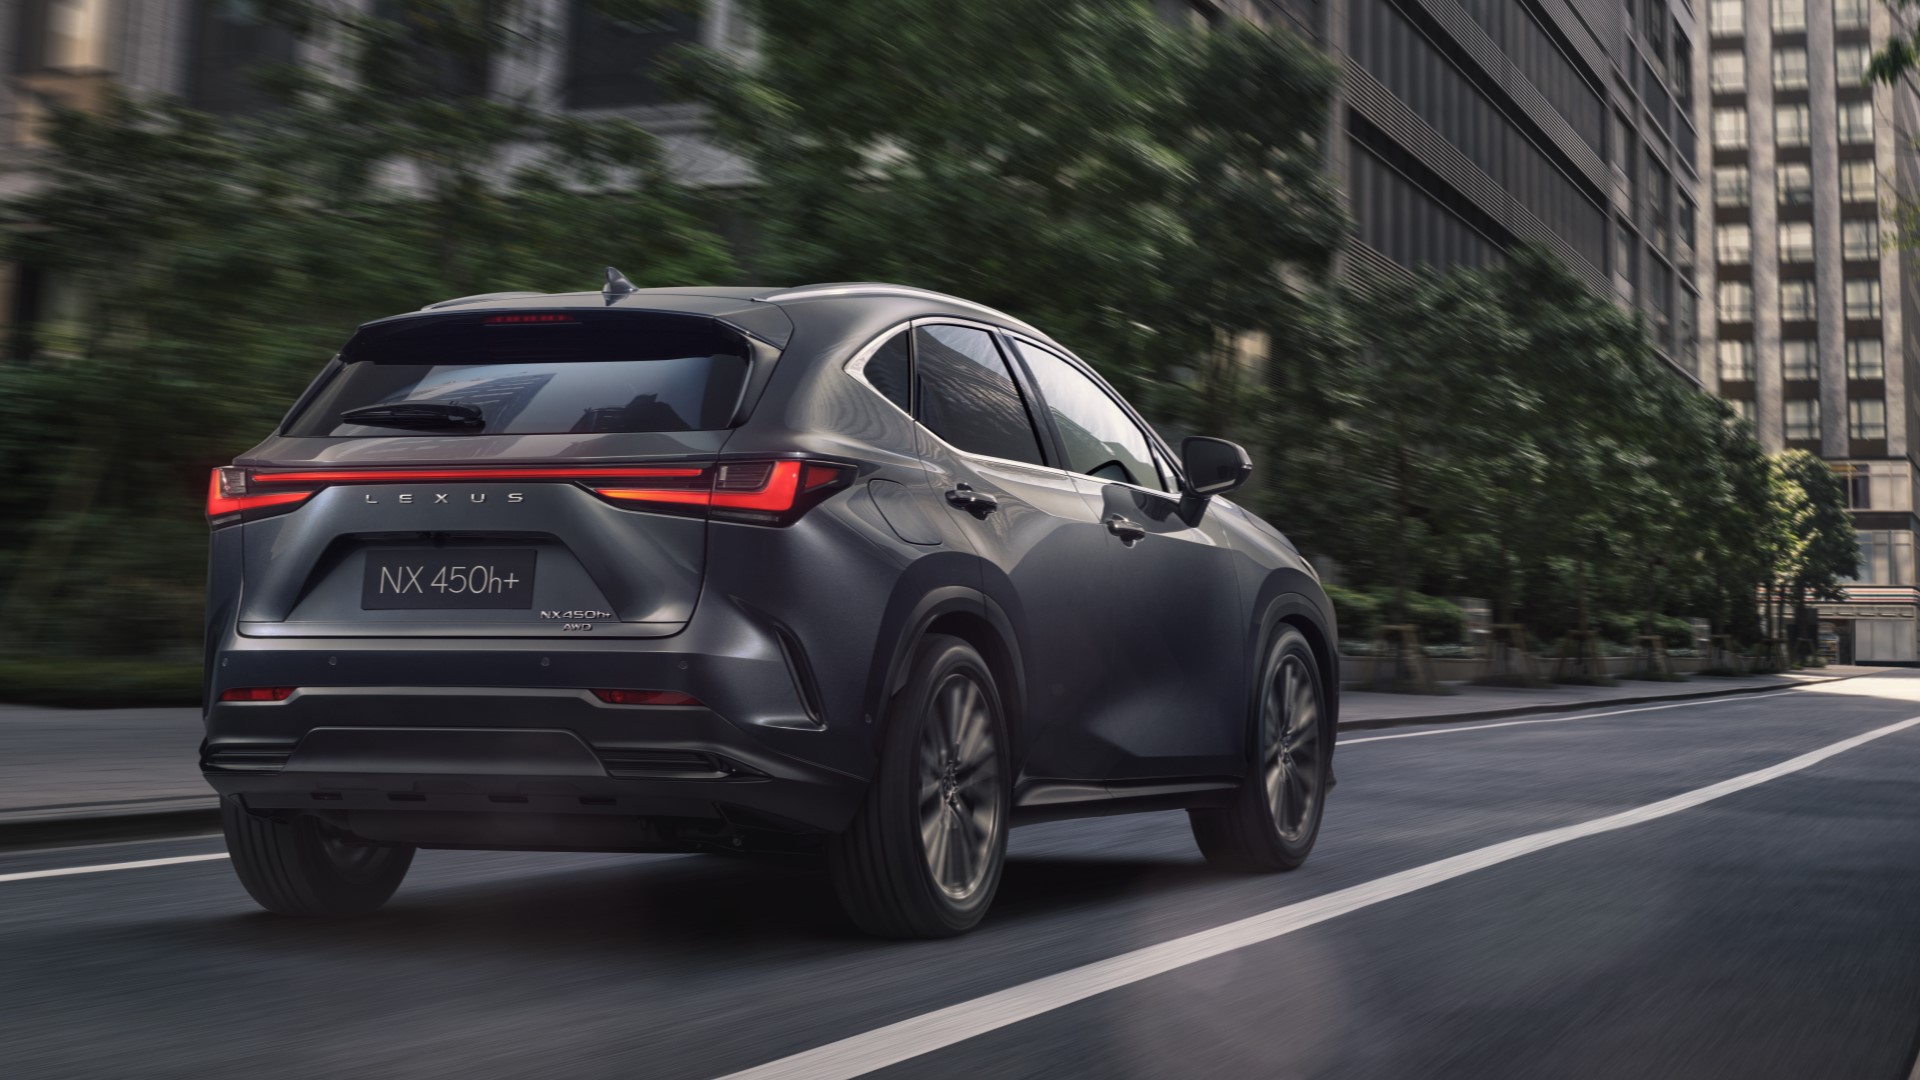 All-New Lexus NX Premieres, Heralds The New Era Of Lexus Design, Driving  Experience And Electrification